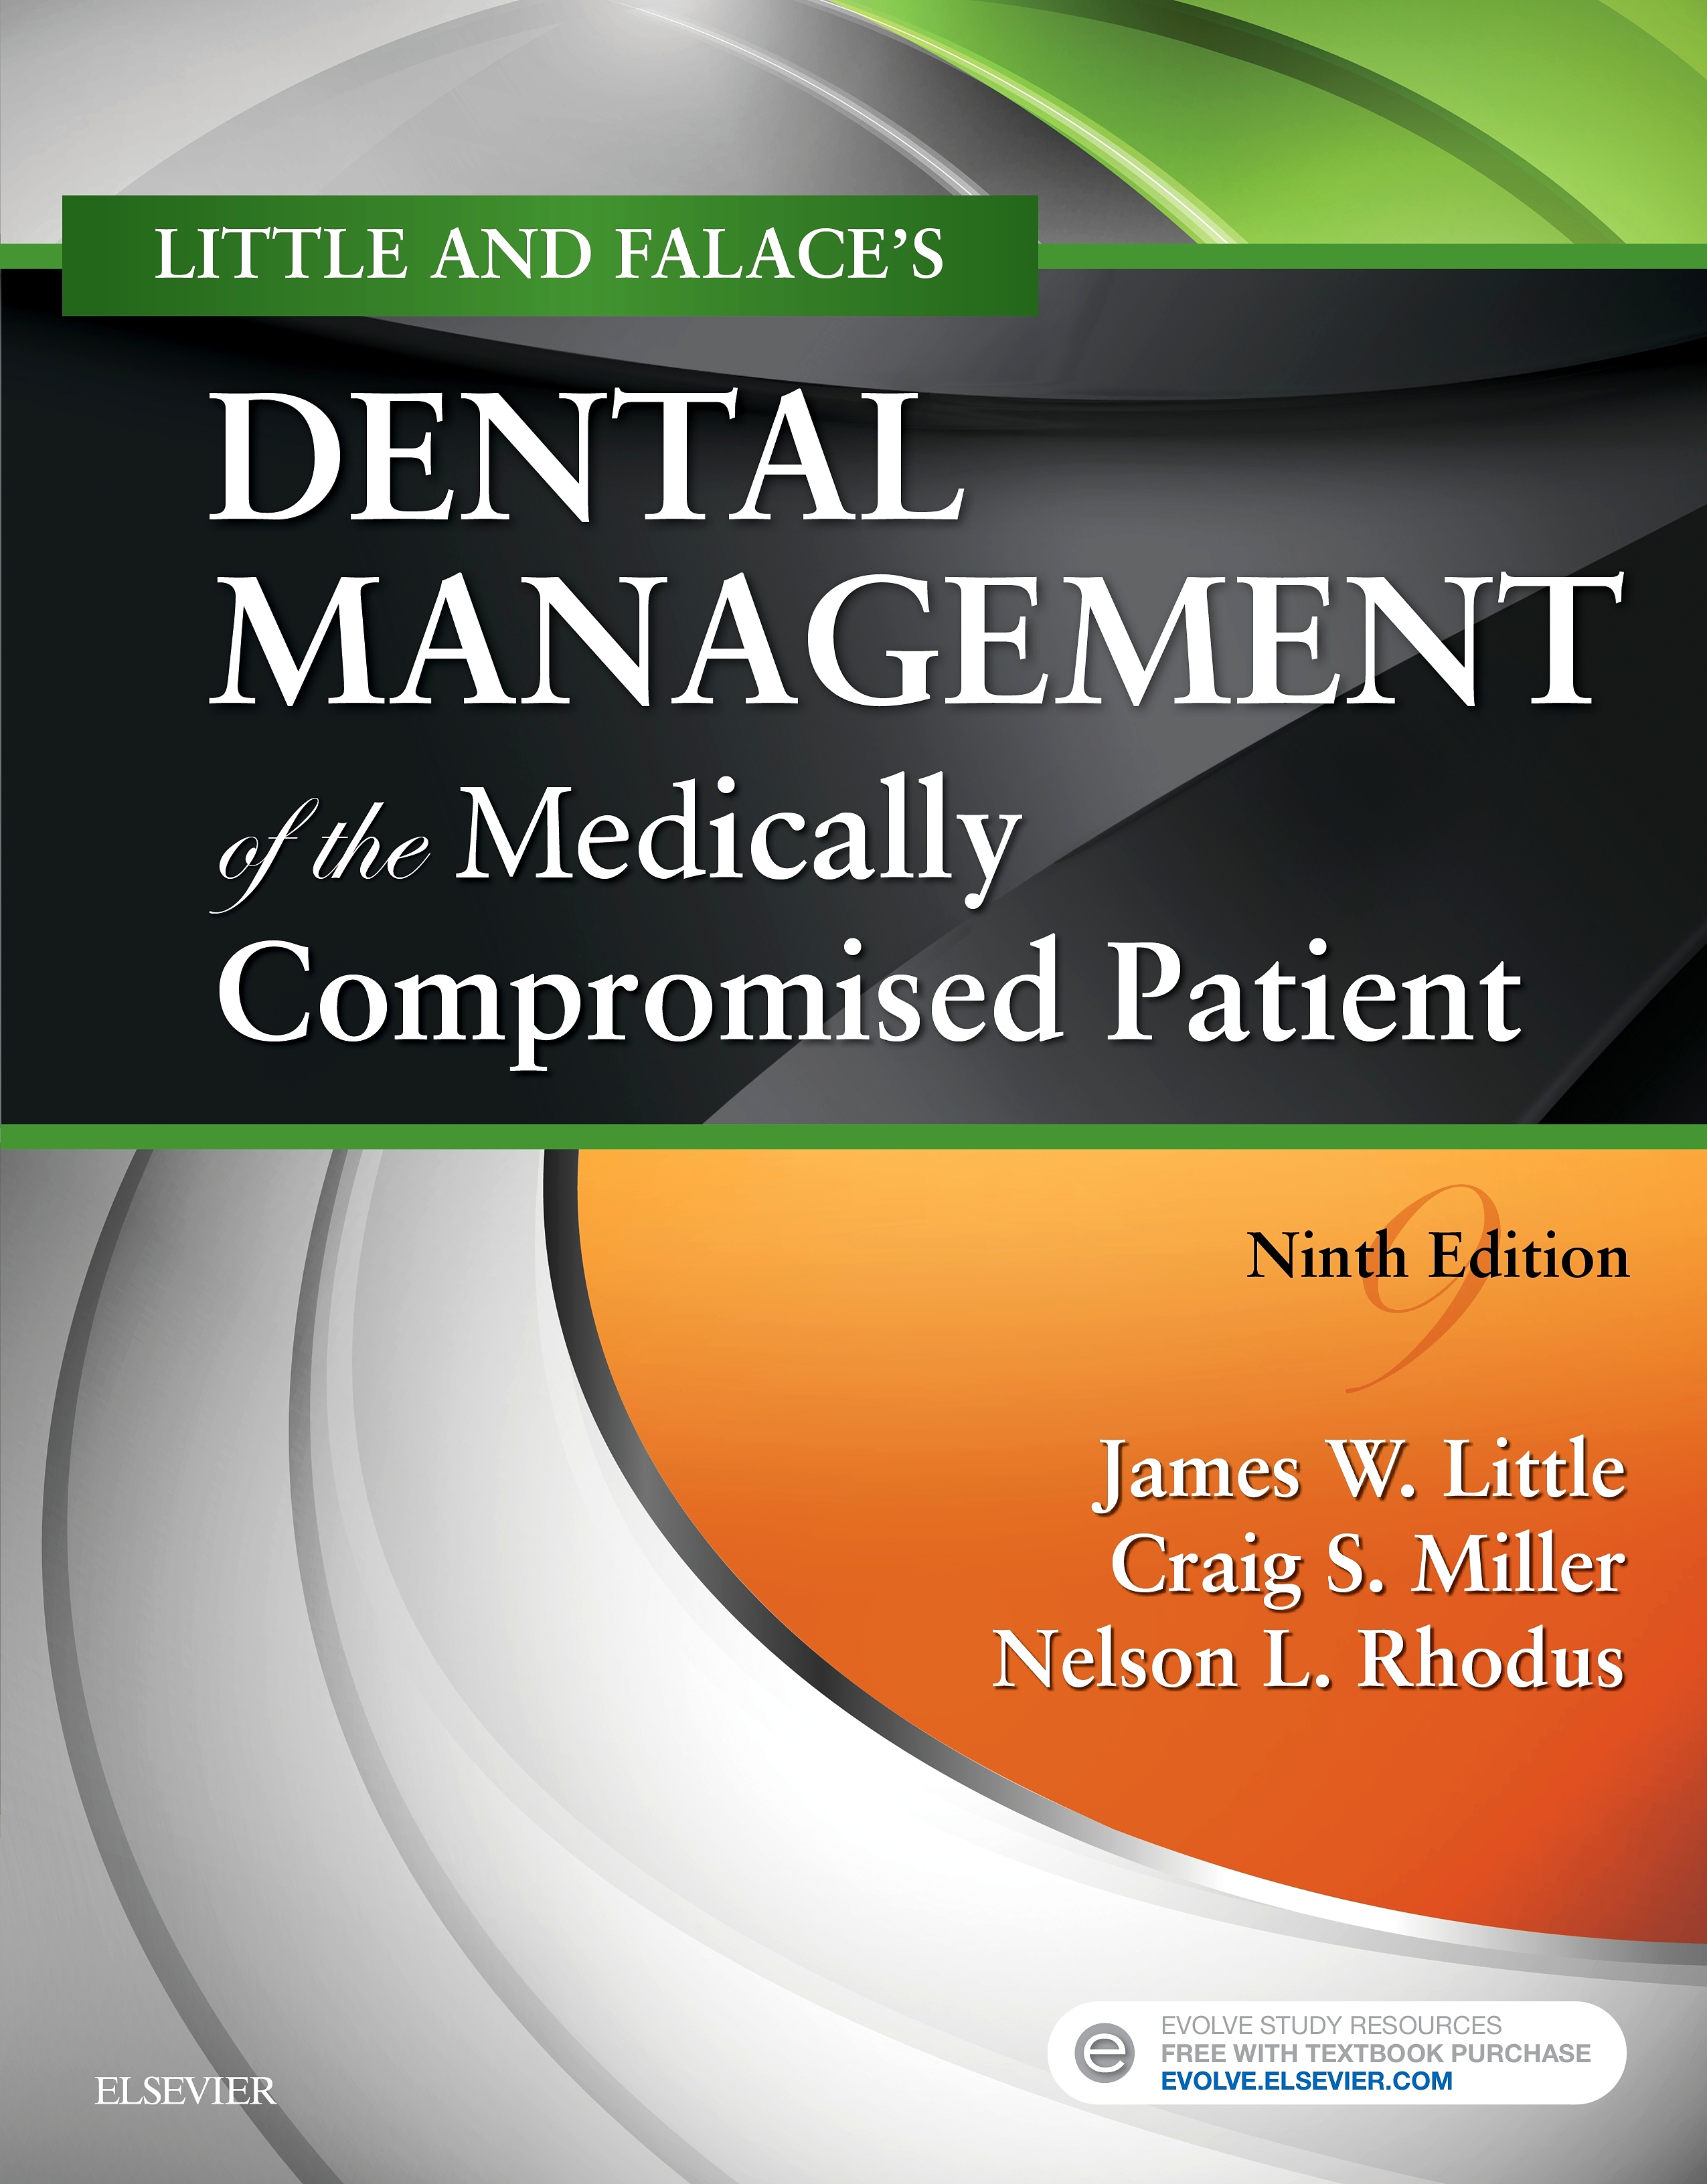 Evolve Resources for Dental Management of the Medically Compromised Patient, 9th Edition